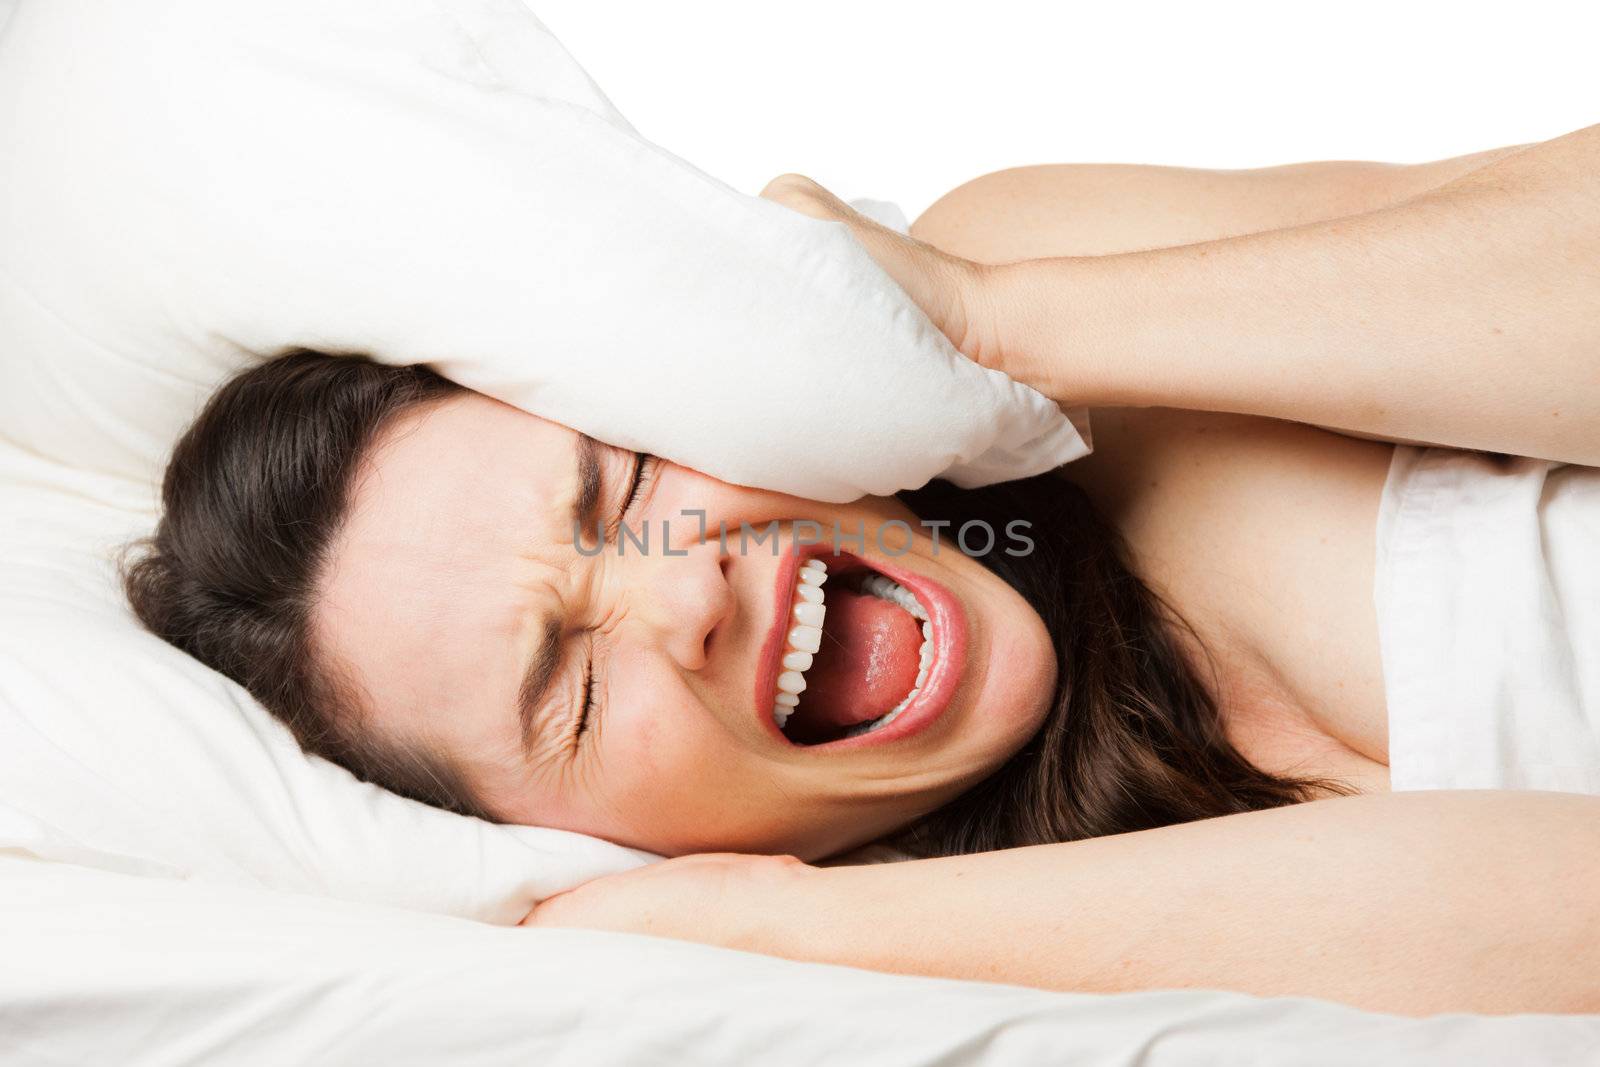 A frustrated tired woman hides her head in her pillow and screams beacuse she can't sleep. Isolated on white.